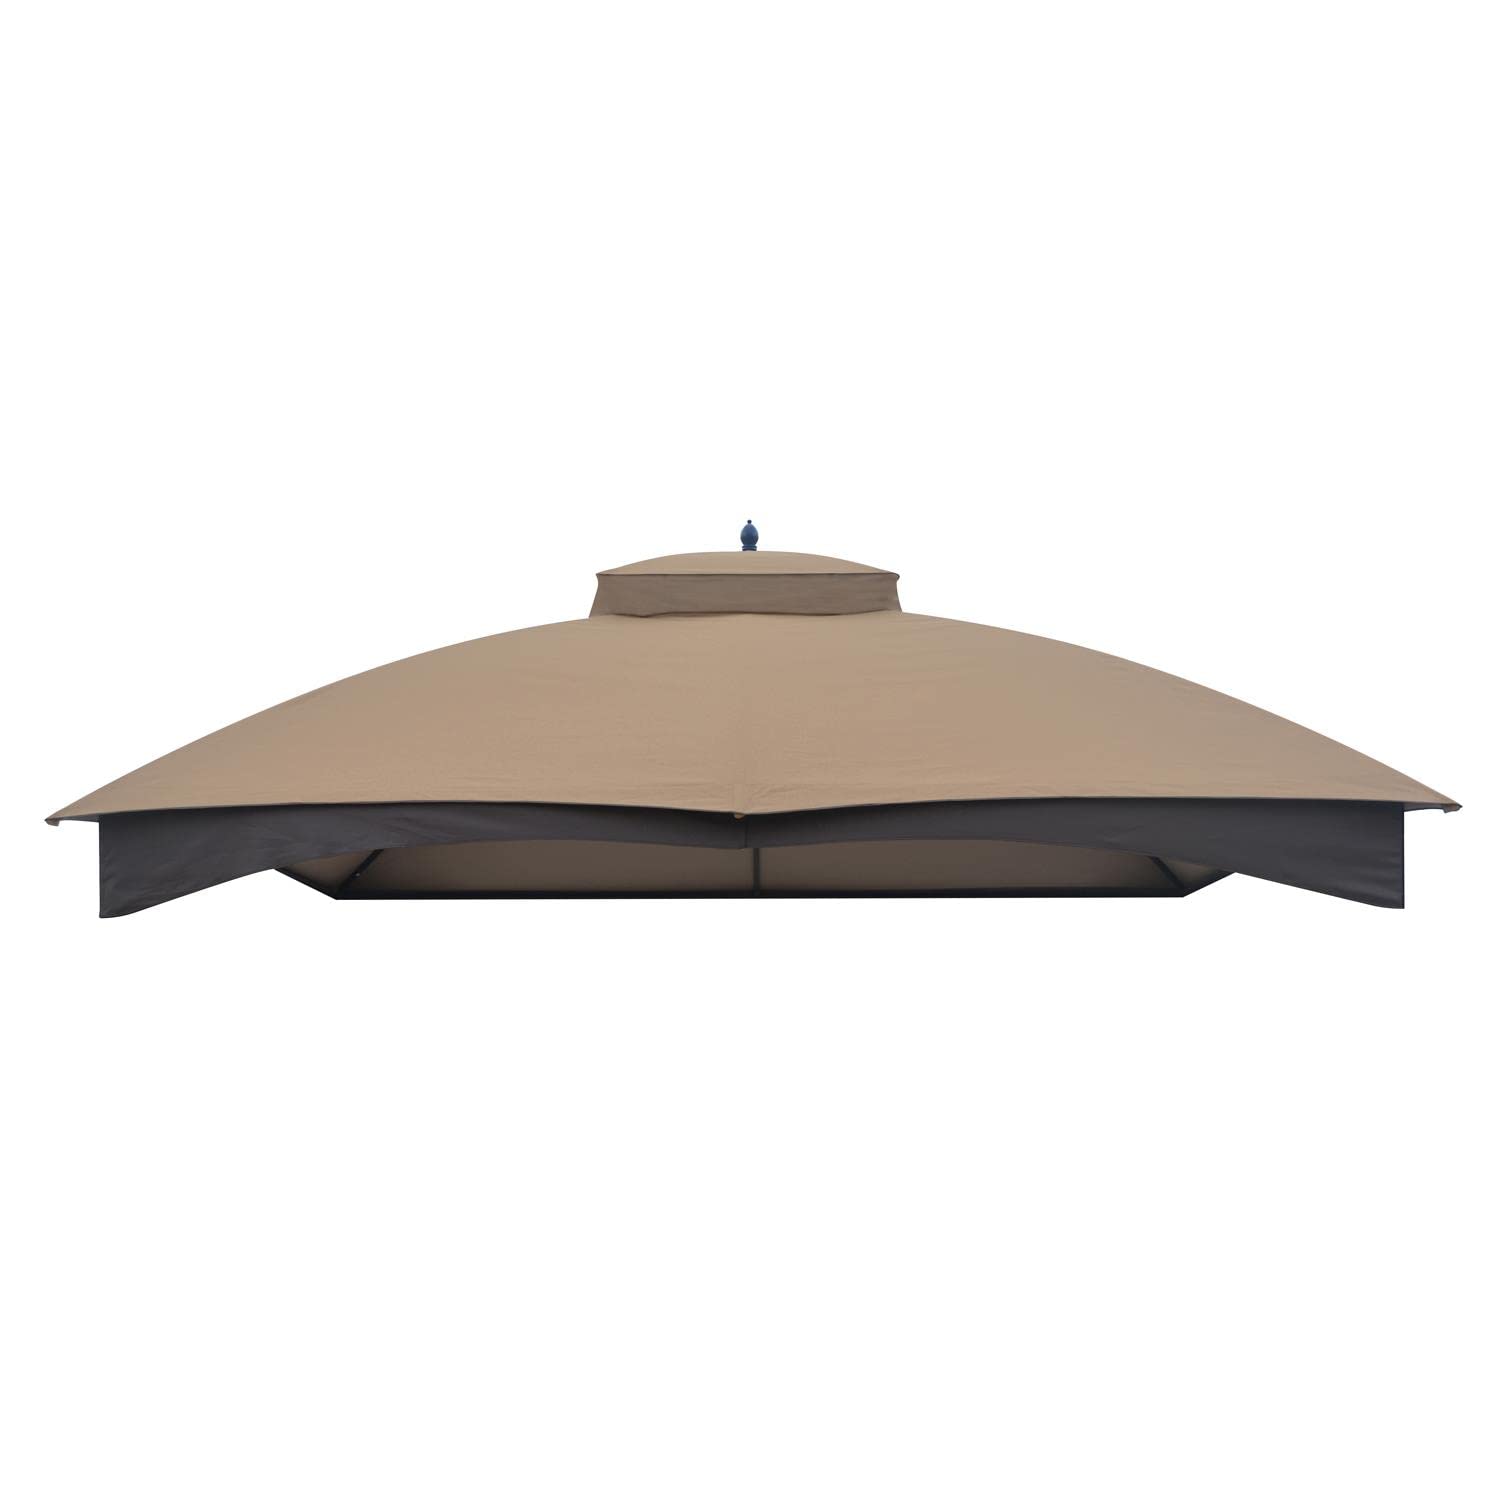 Cloud Mountain Replacement Canopy Only Polyester 10 x 12, Brown